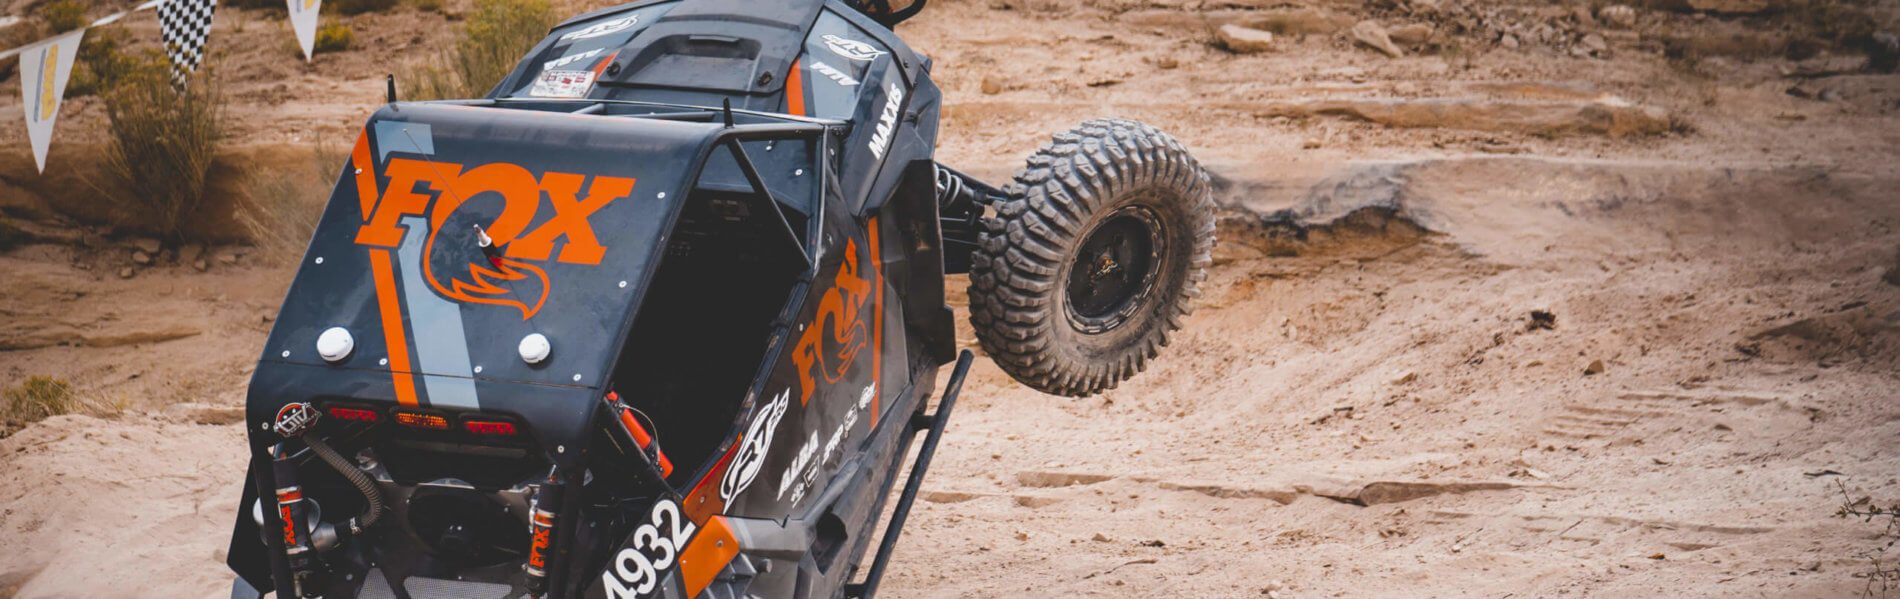 SHOP our complete line of FOX Shocks, Coilovers, and Accessories.